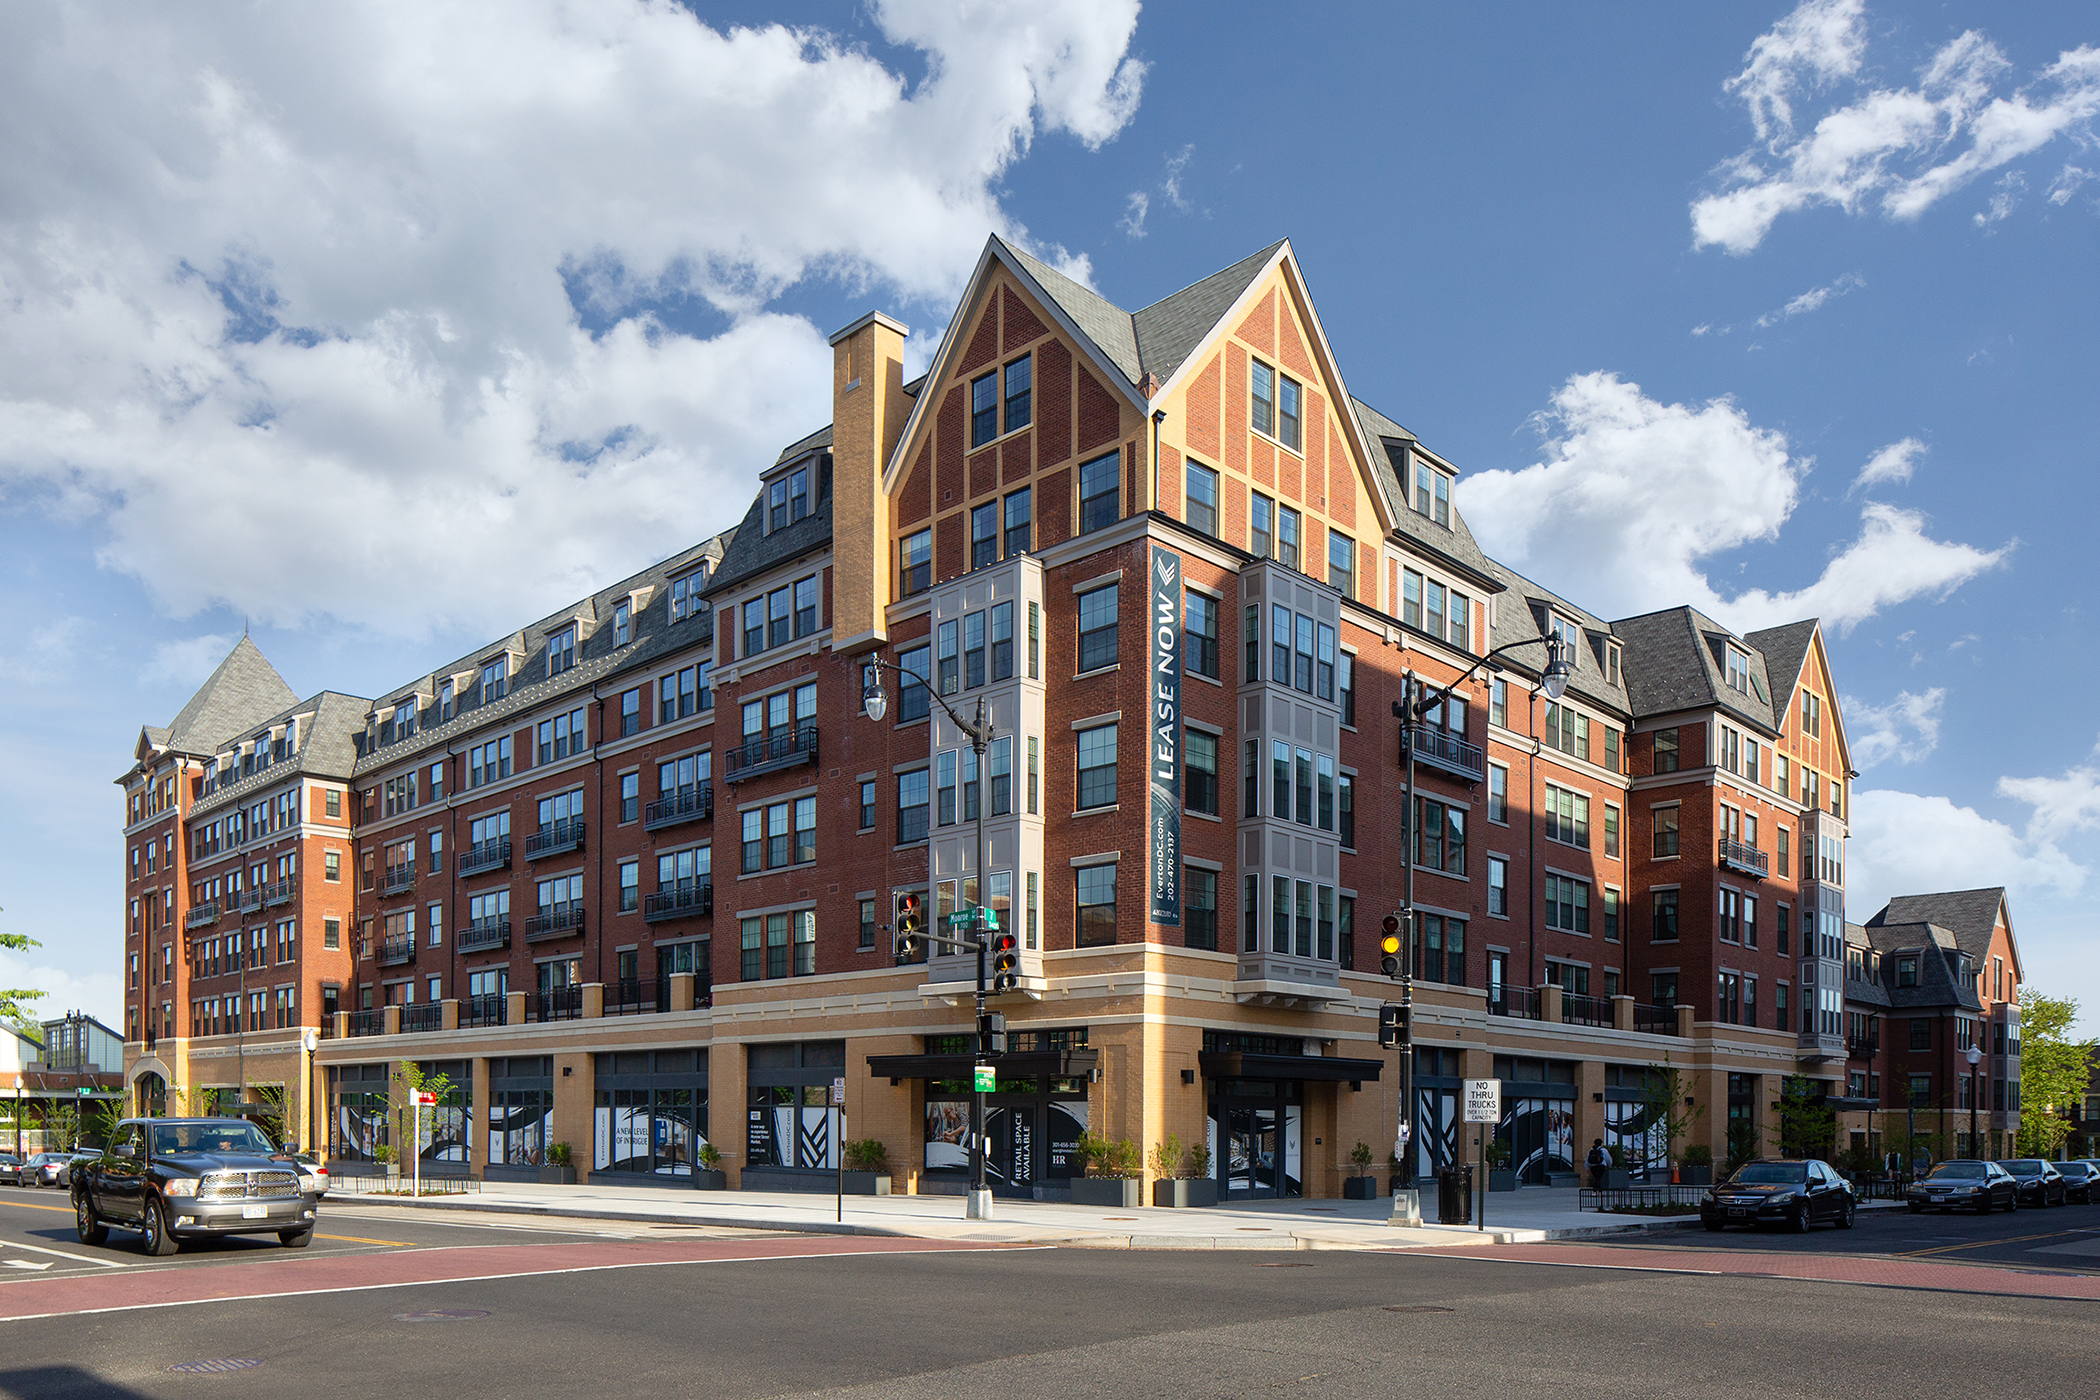 HENRY ADAMS provided the MEP engineering design for the new mixed-use project.